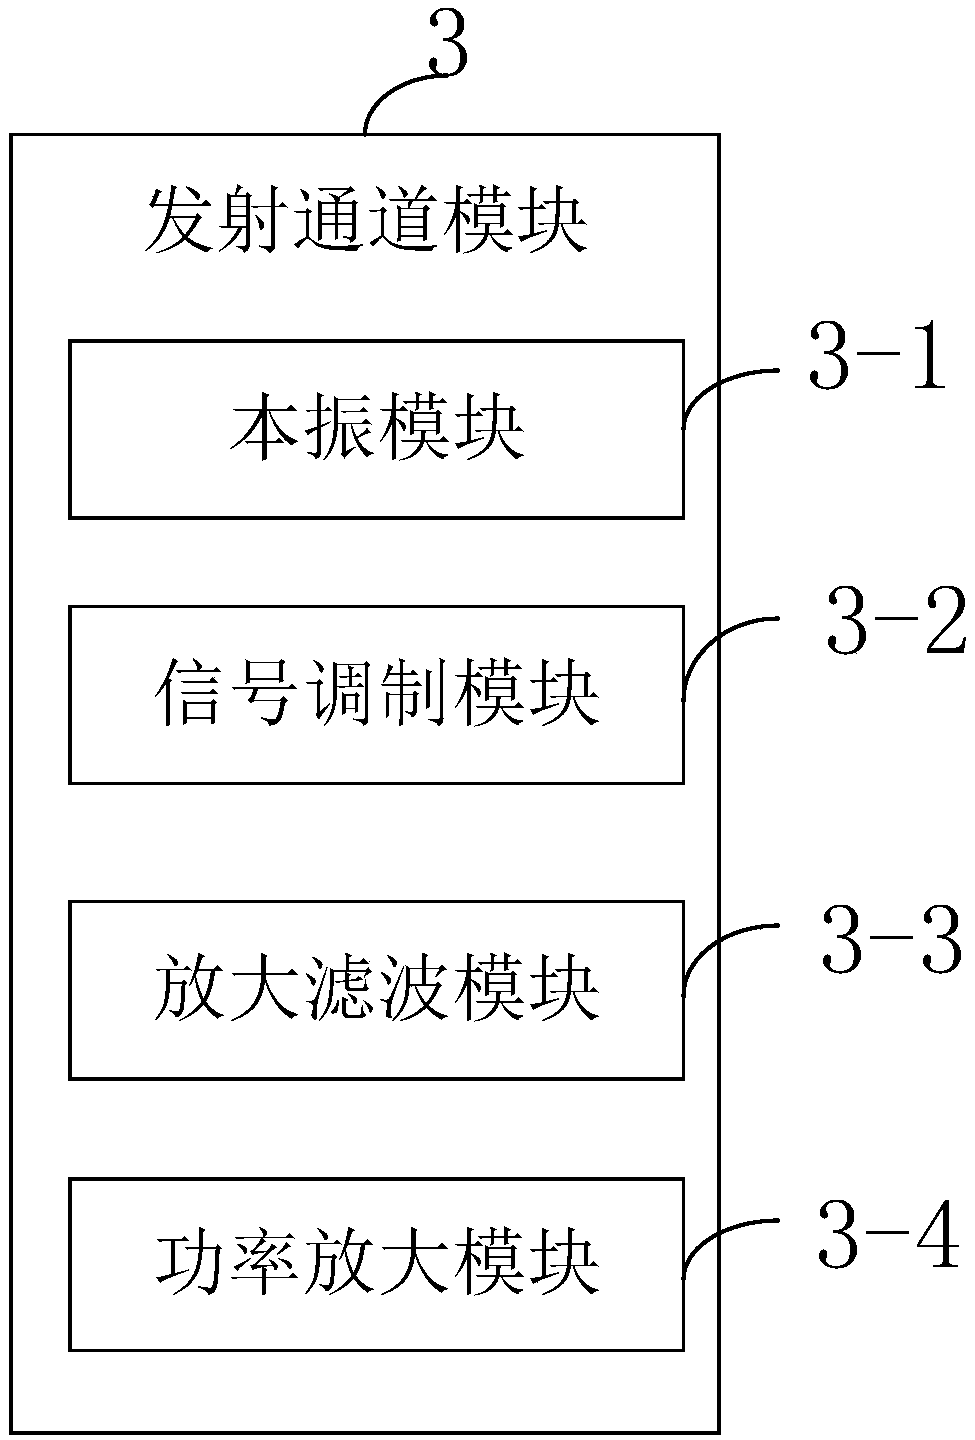 Beidou RDSS short message emitting device without receiving channel